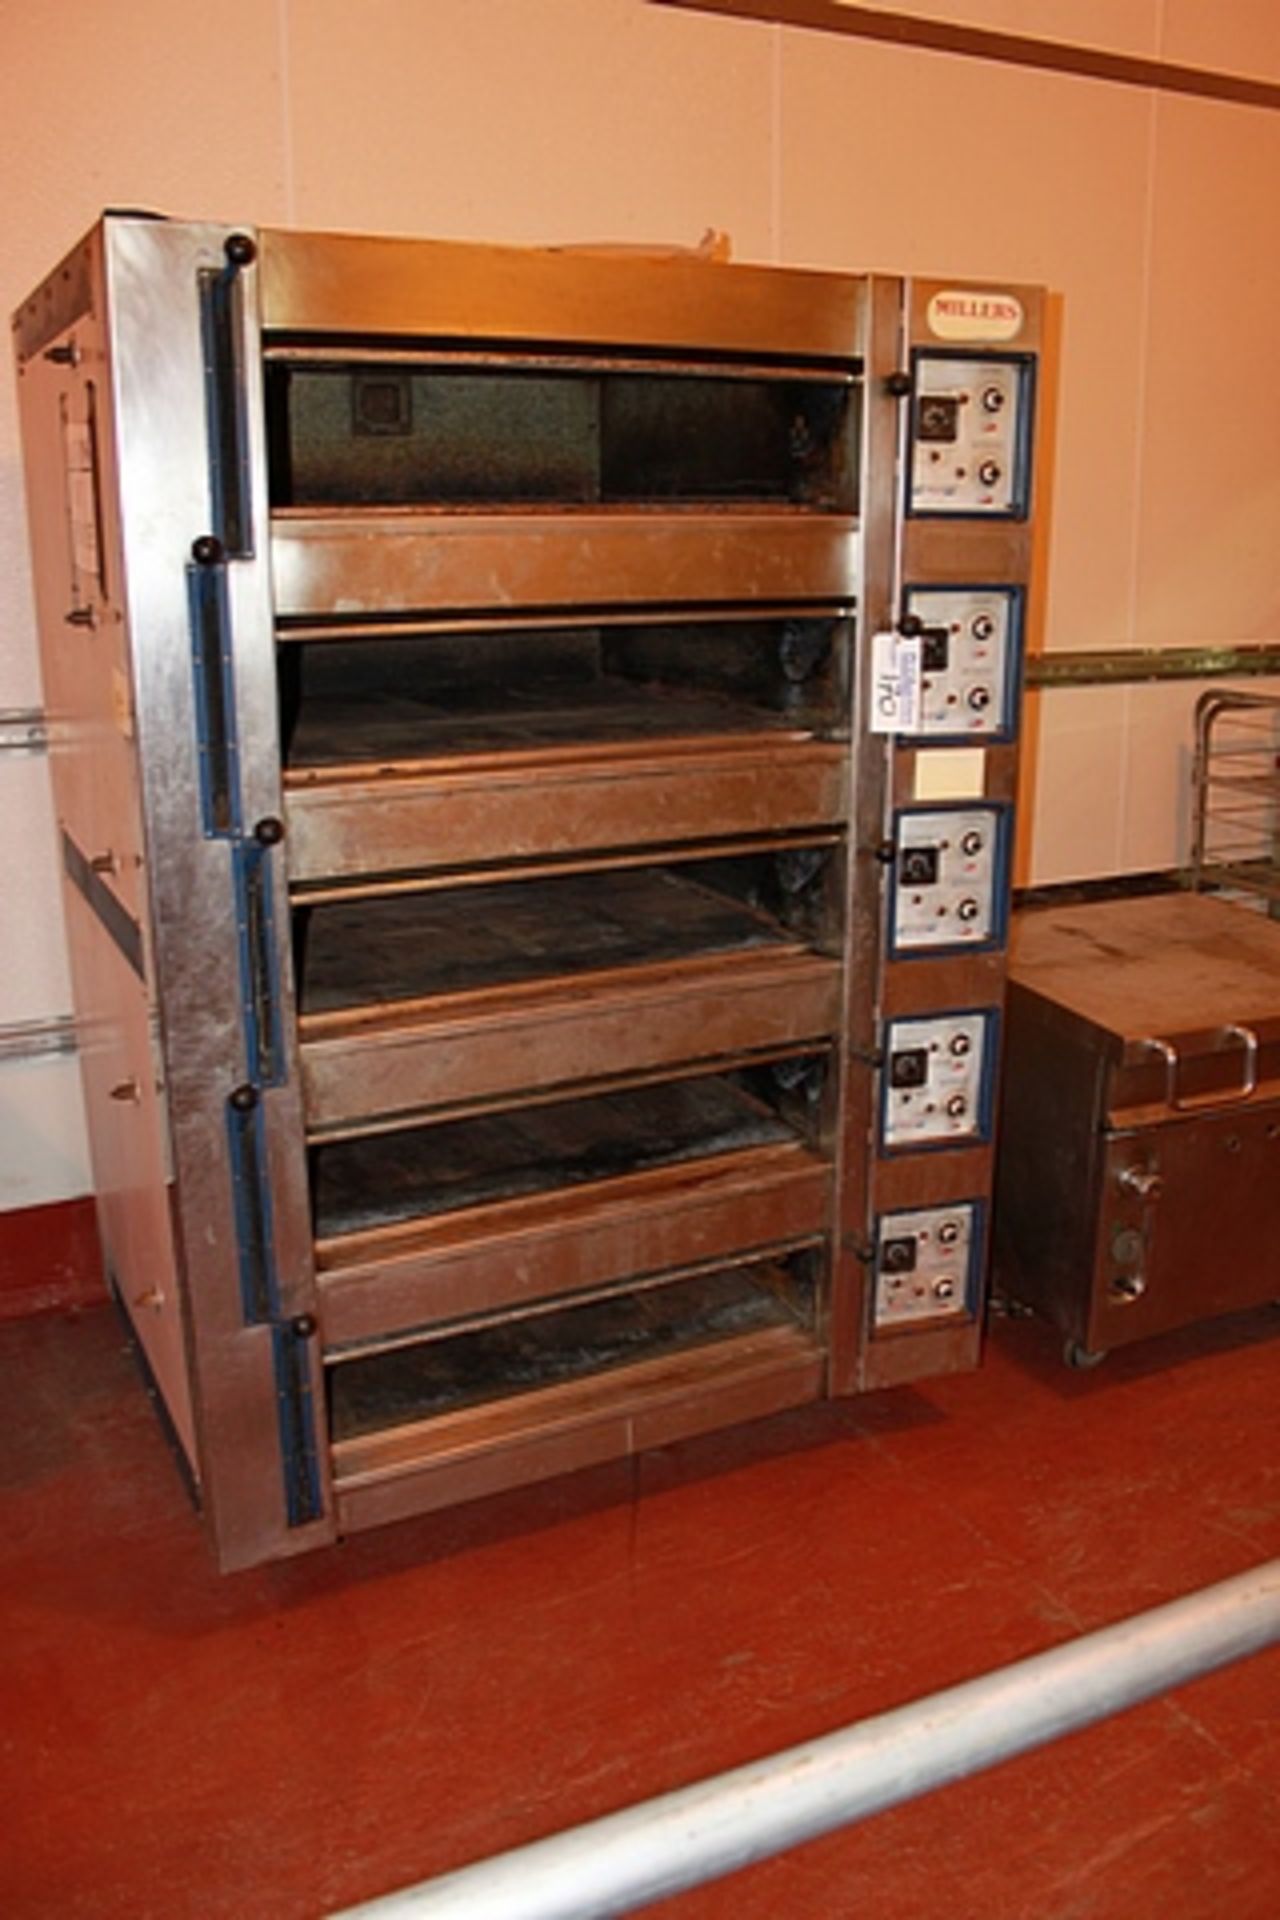 Millers Vanguard five deck electric oven each deck 950mm wide x 200mm tall each deck independently